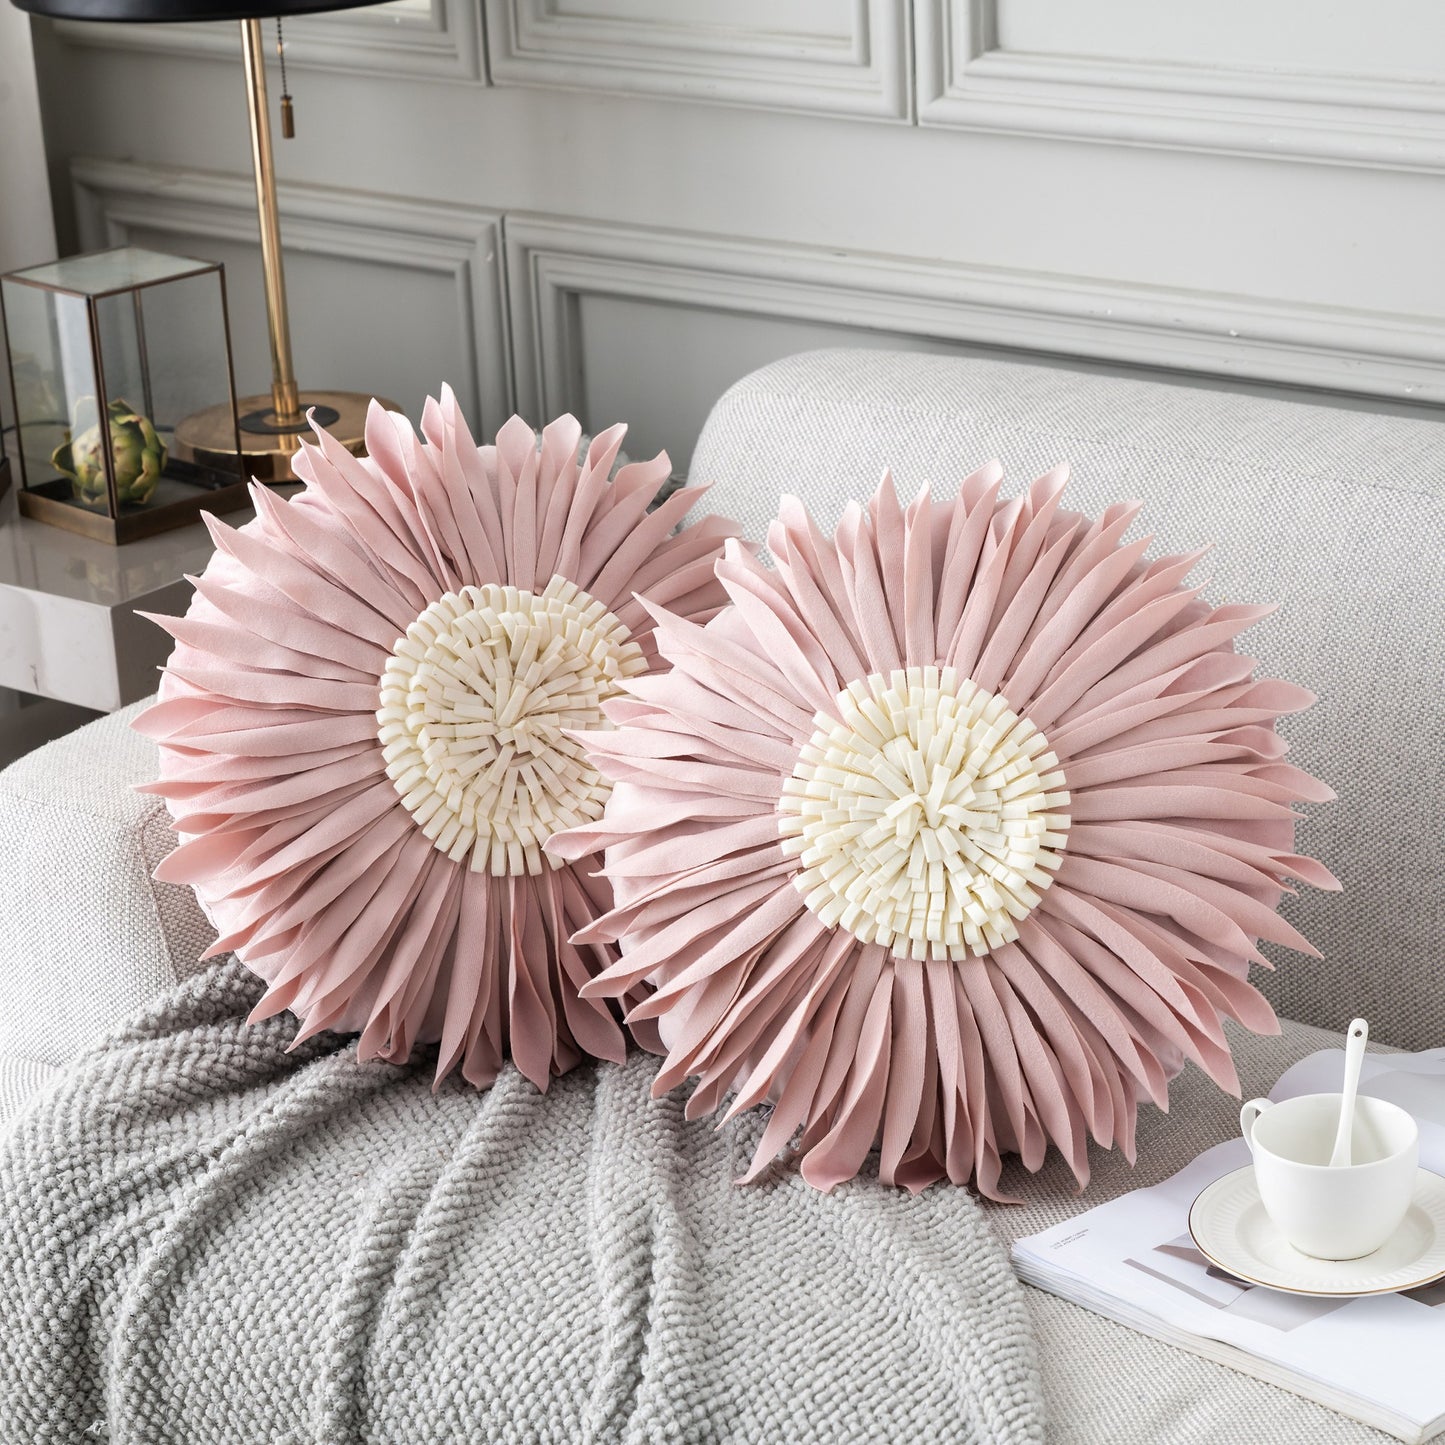 Rosette Pillow - Round Pink - Gifts by Art Tree